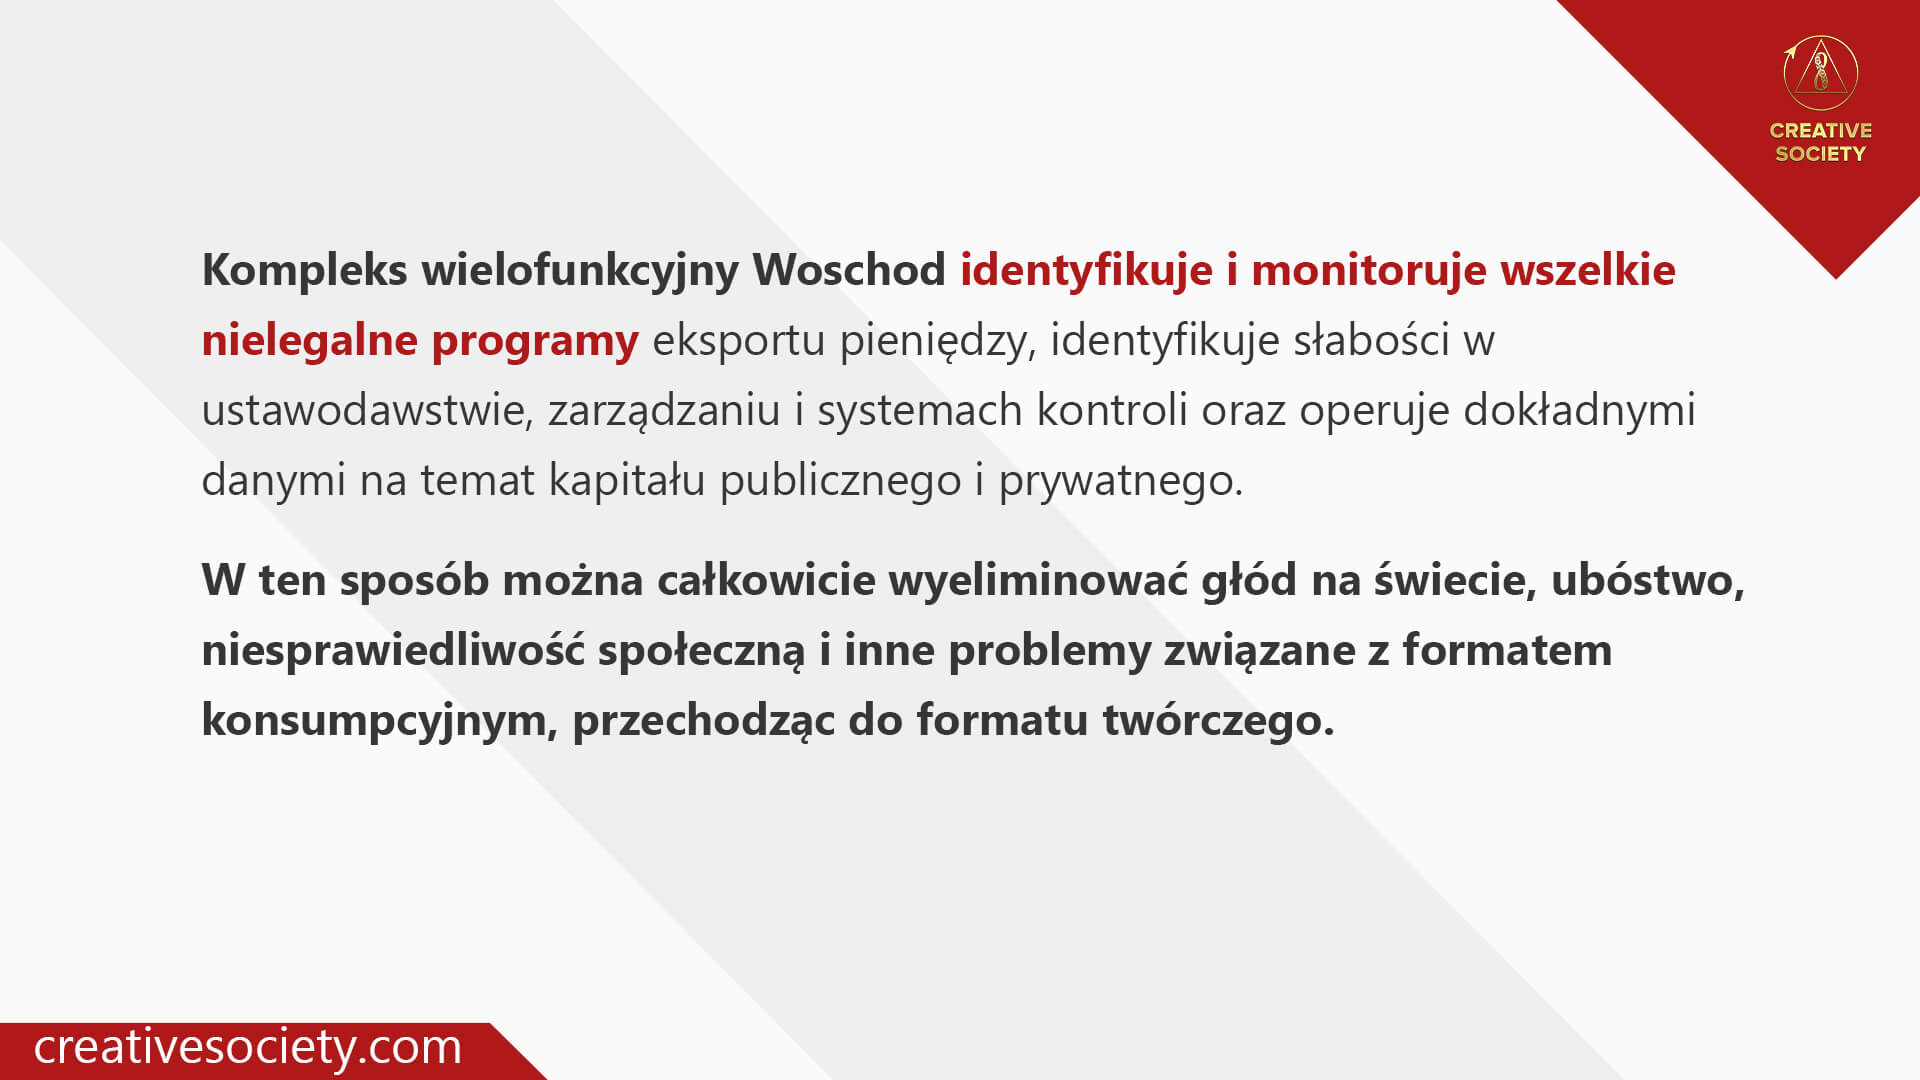 Voskhod MPC detects and monitors any illegal schemes